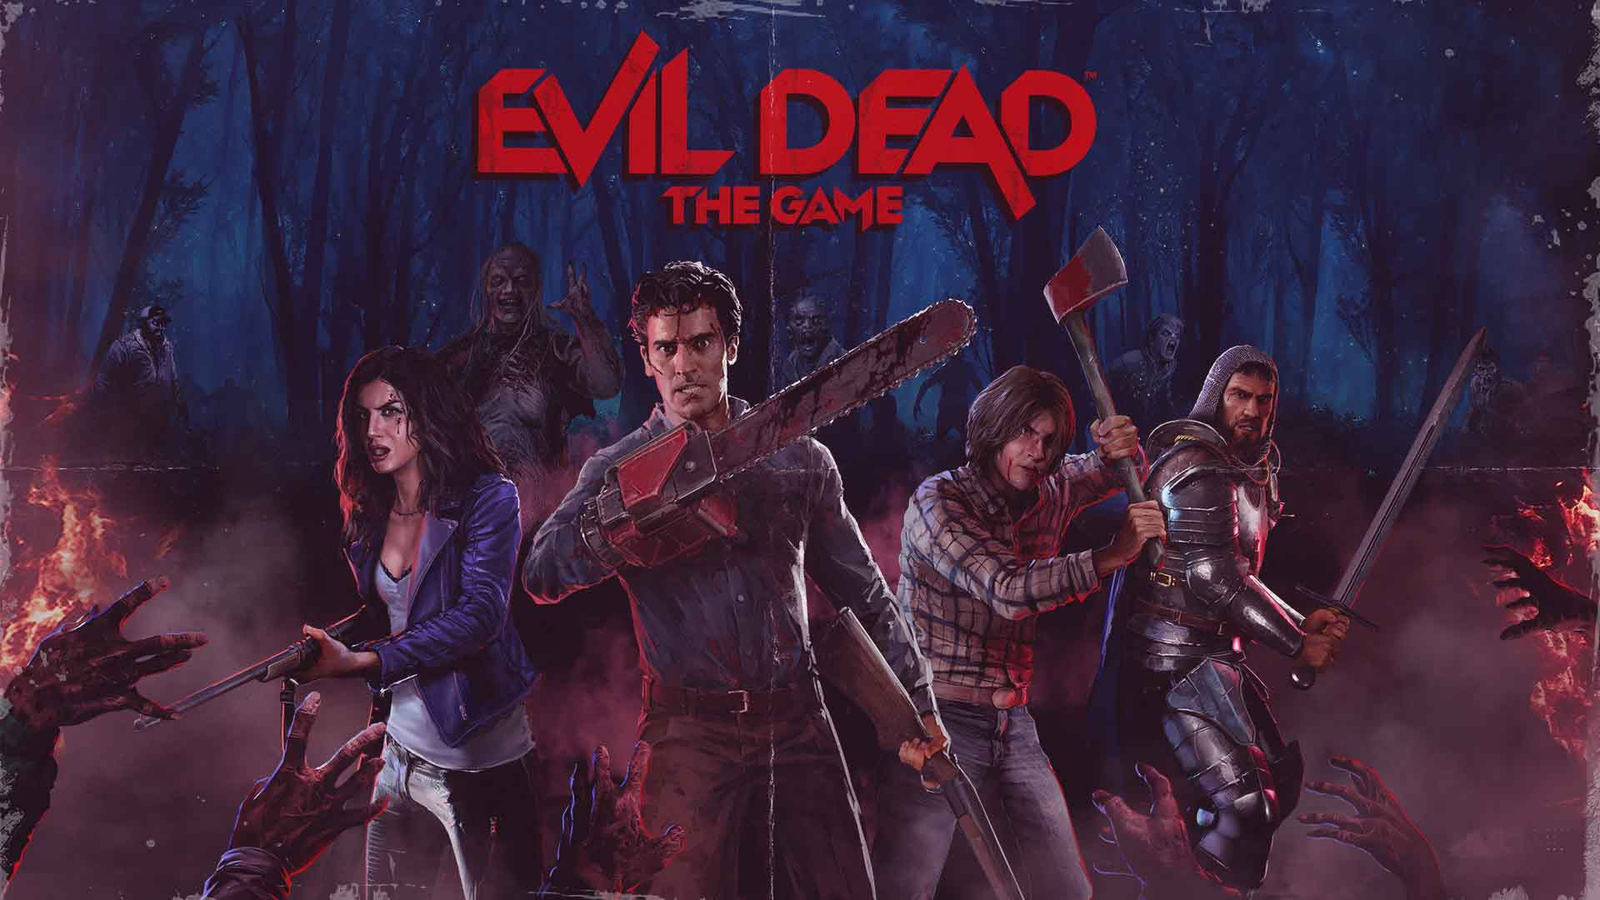 Evil Dead: The Game] Absolute grind to get to max level, but a